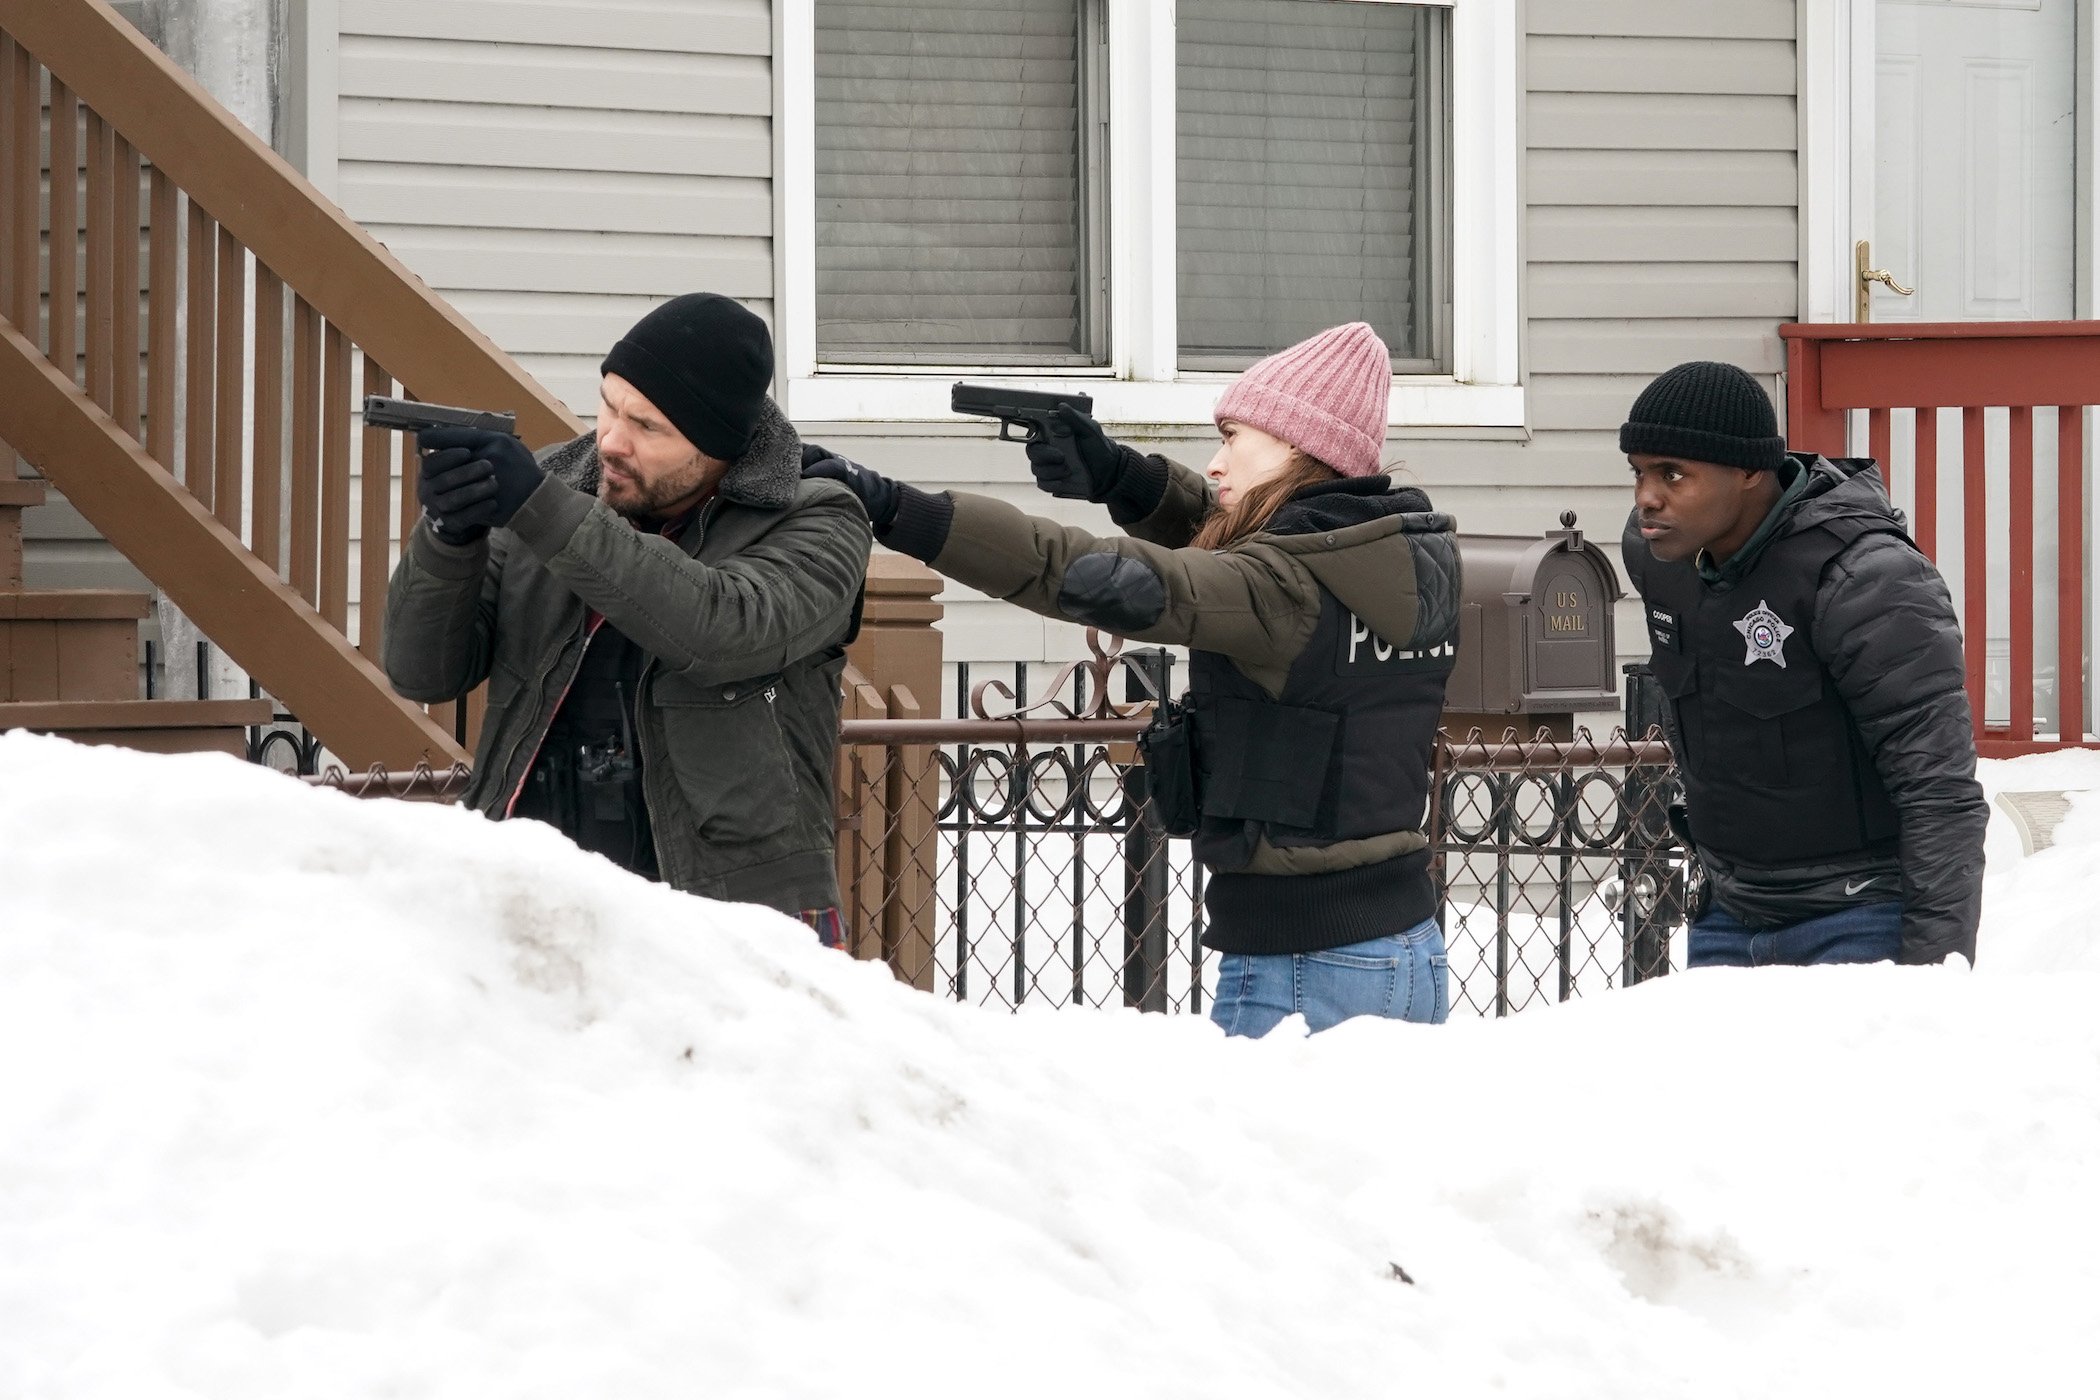 'Chicago P.D.' cast members -- John Flueger as Adam Ruzek, Marina Squerciati as Kim Burgess, and Cleveland Berto as Andre Cooper. Fans want to know if Cleveland Berto will return to 'Chicago P.D.' Season 9